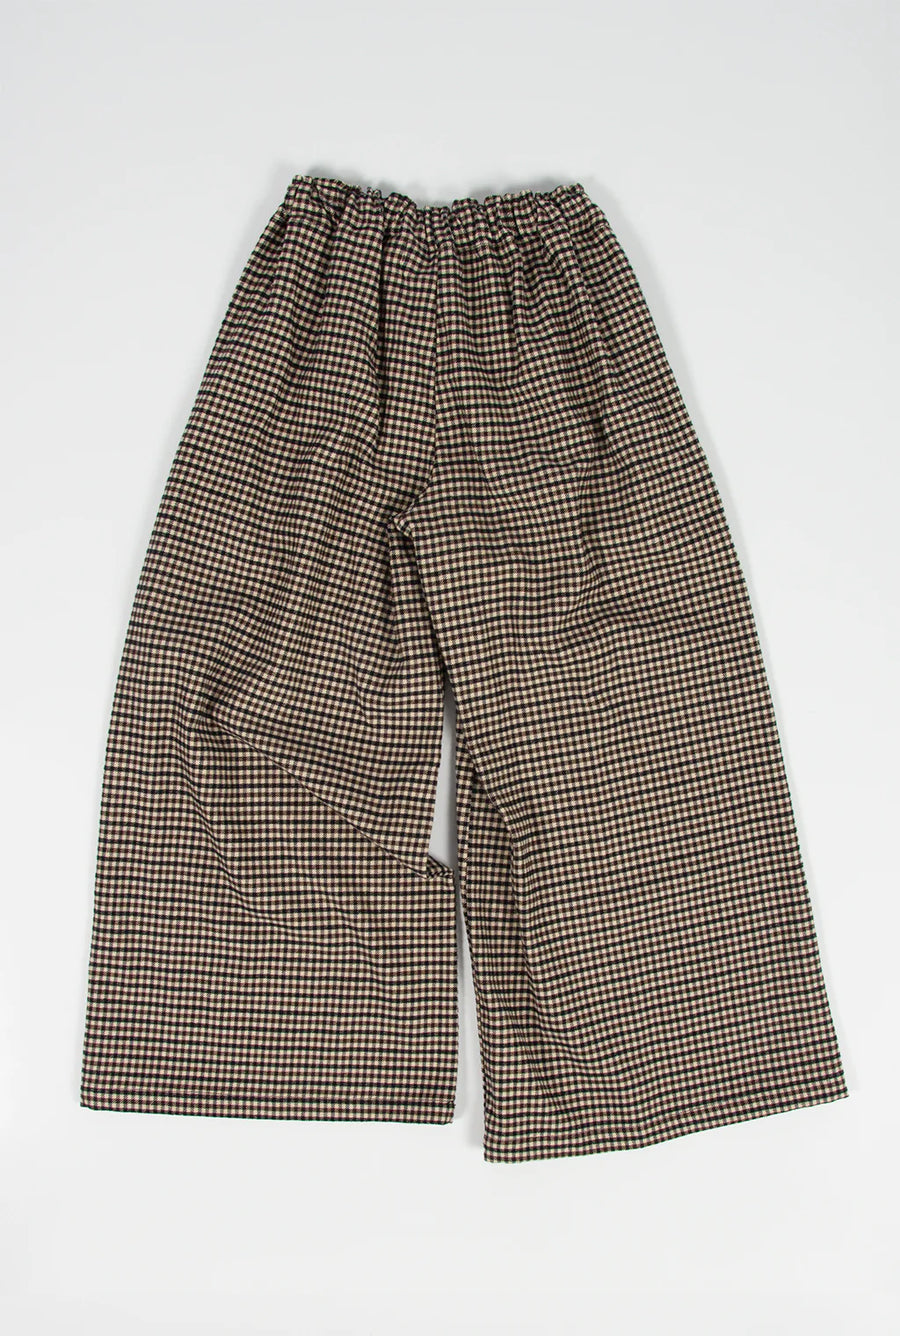 Tangerine - oversized check trousers